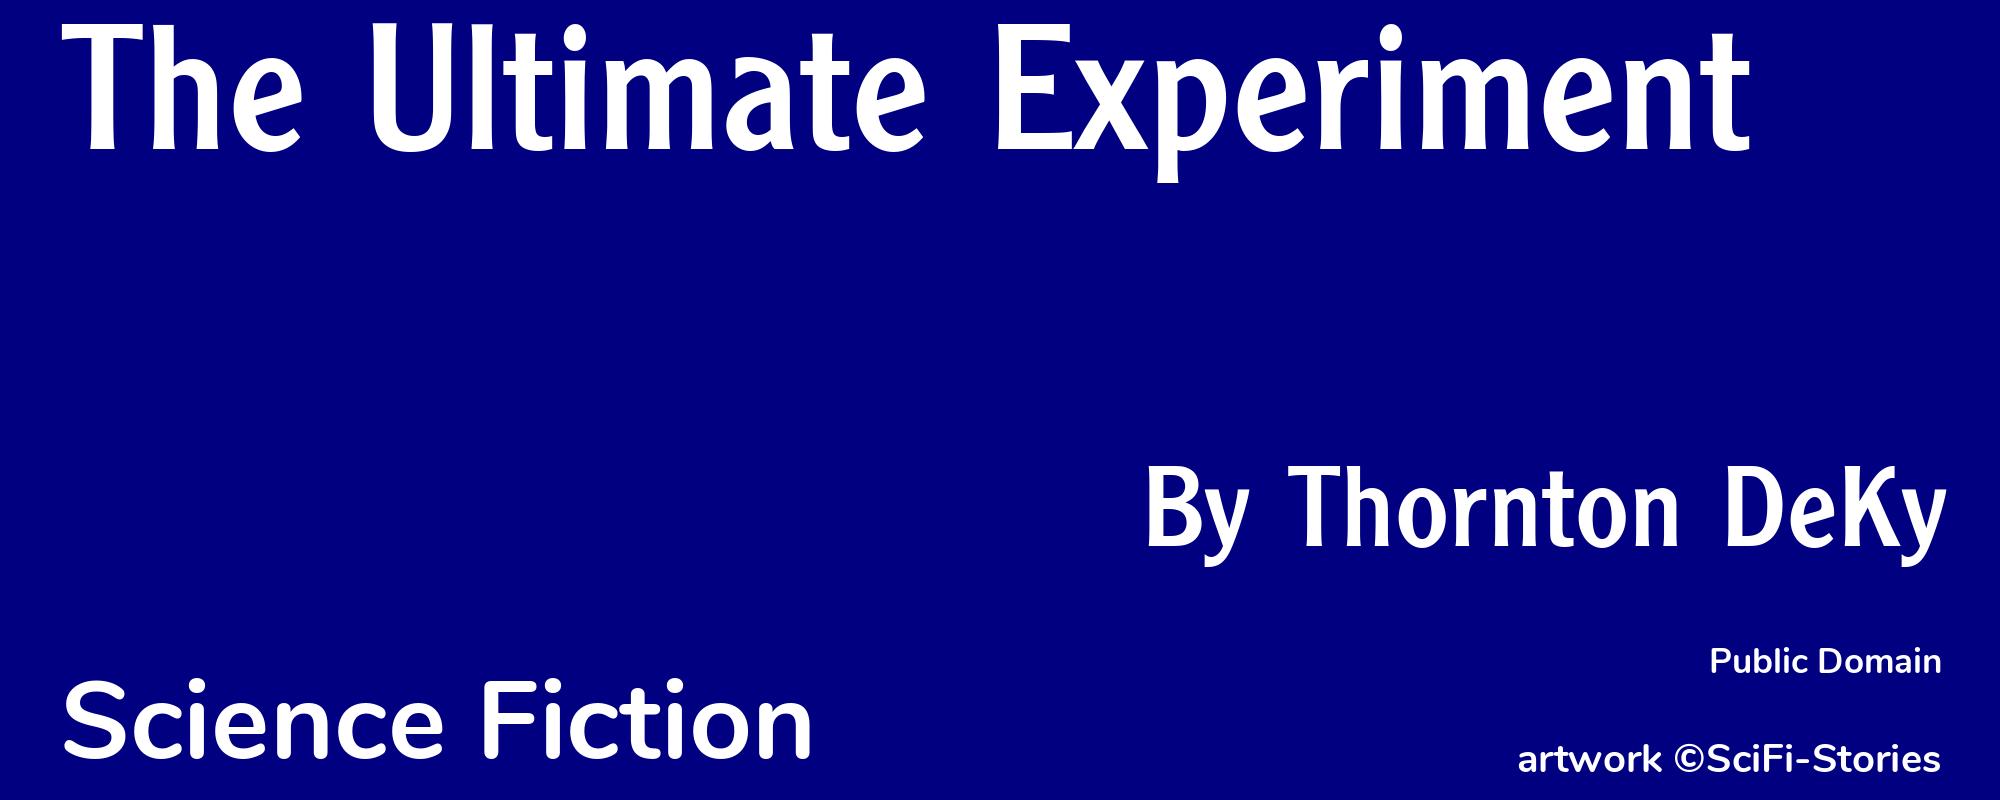 The Ultimate Experiment - Cover